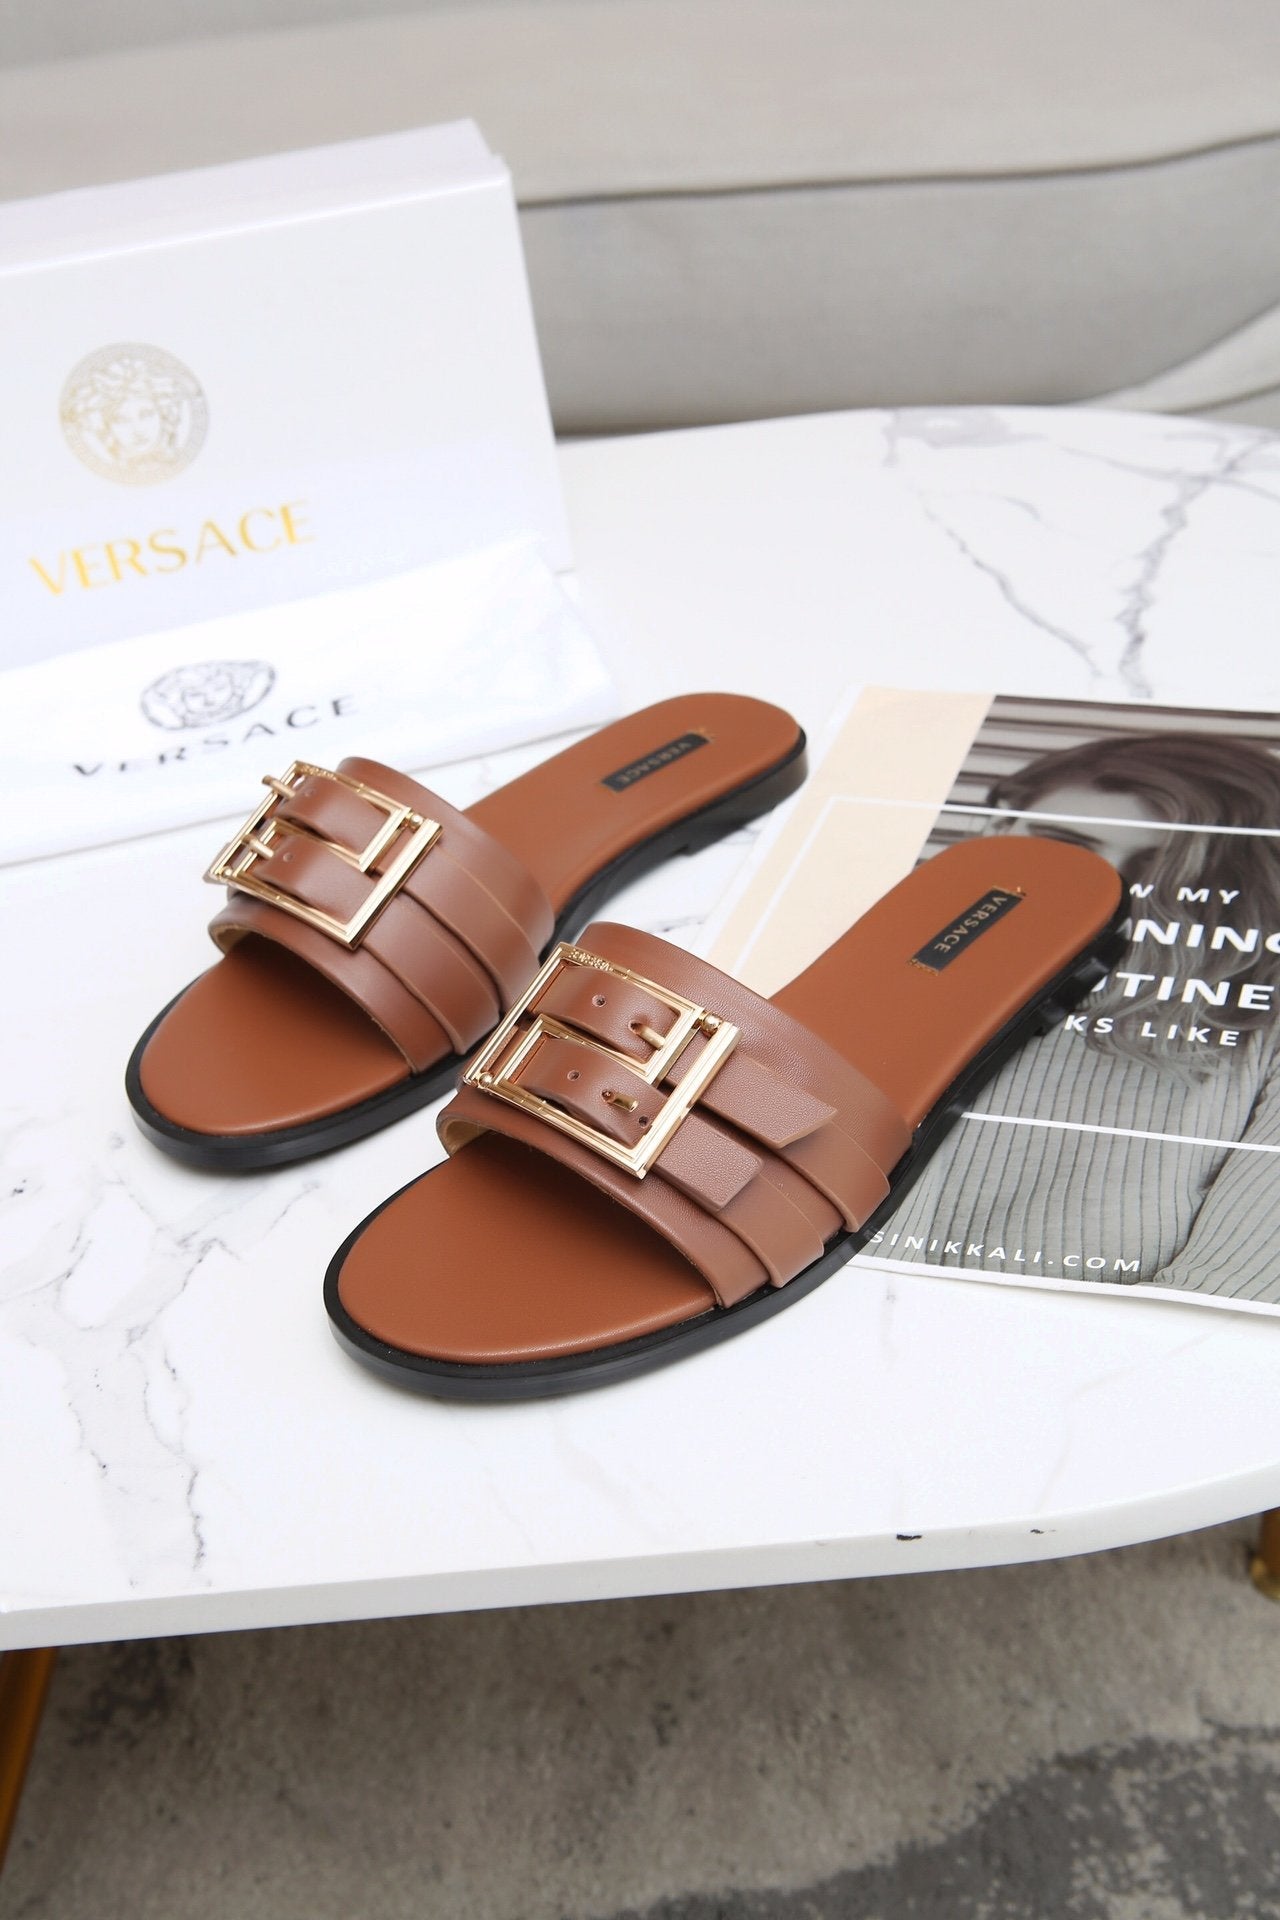 Versace Women's 2022 NEW ARRIVALS Fashion Slippers Sandals Shoes